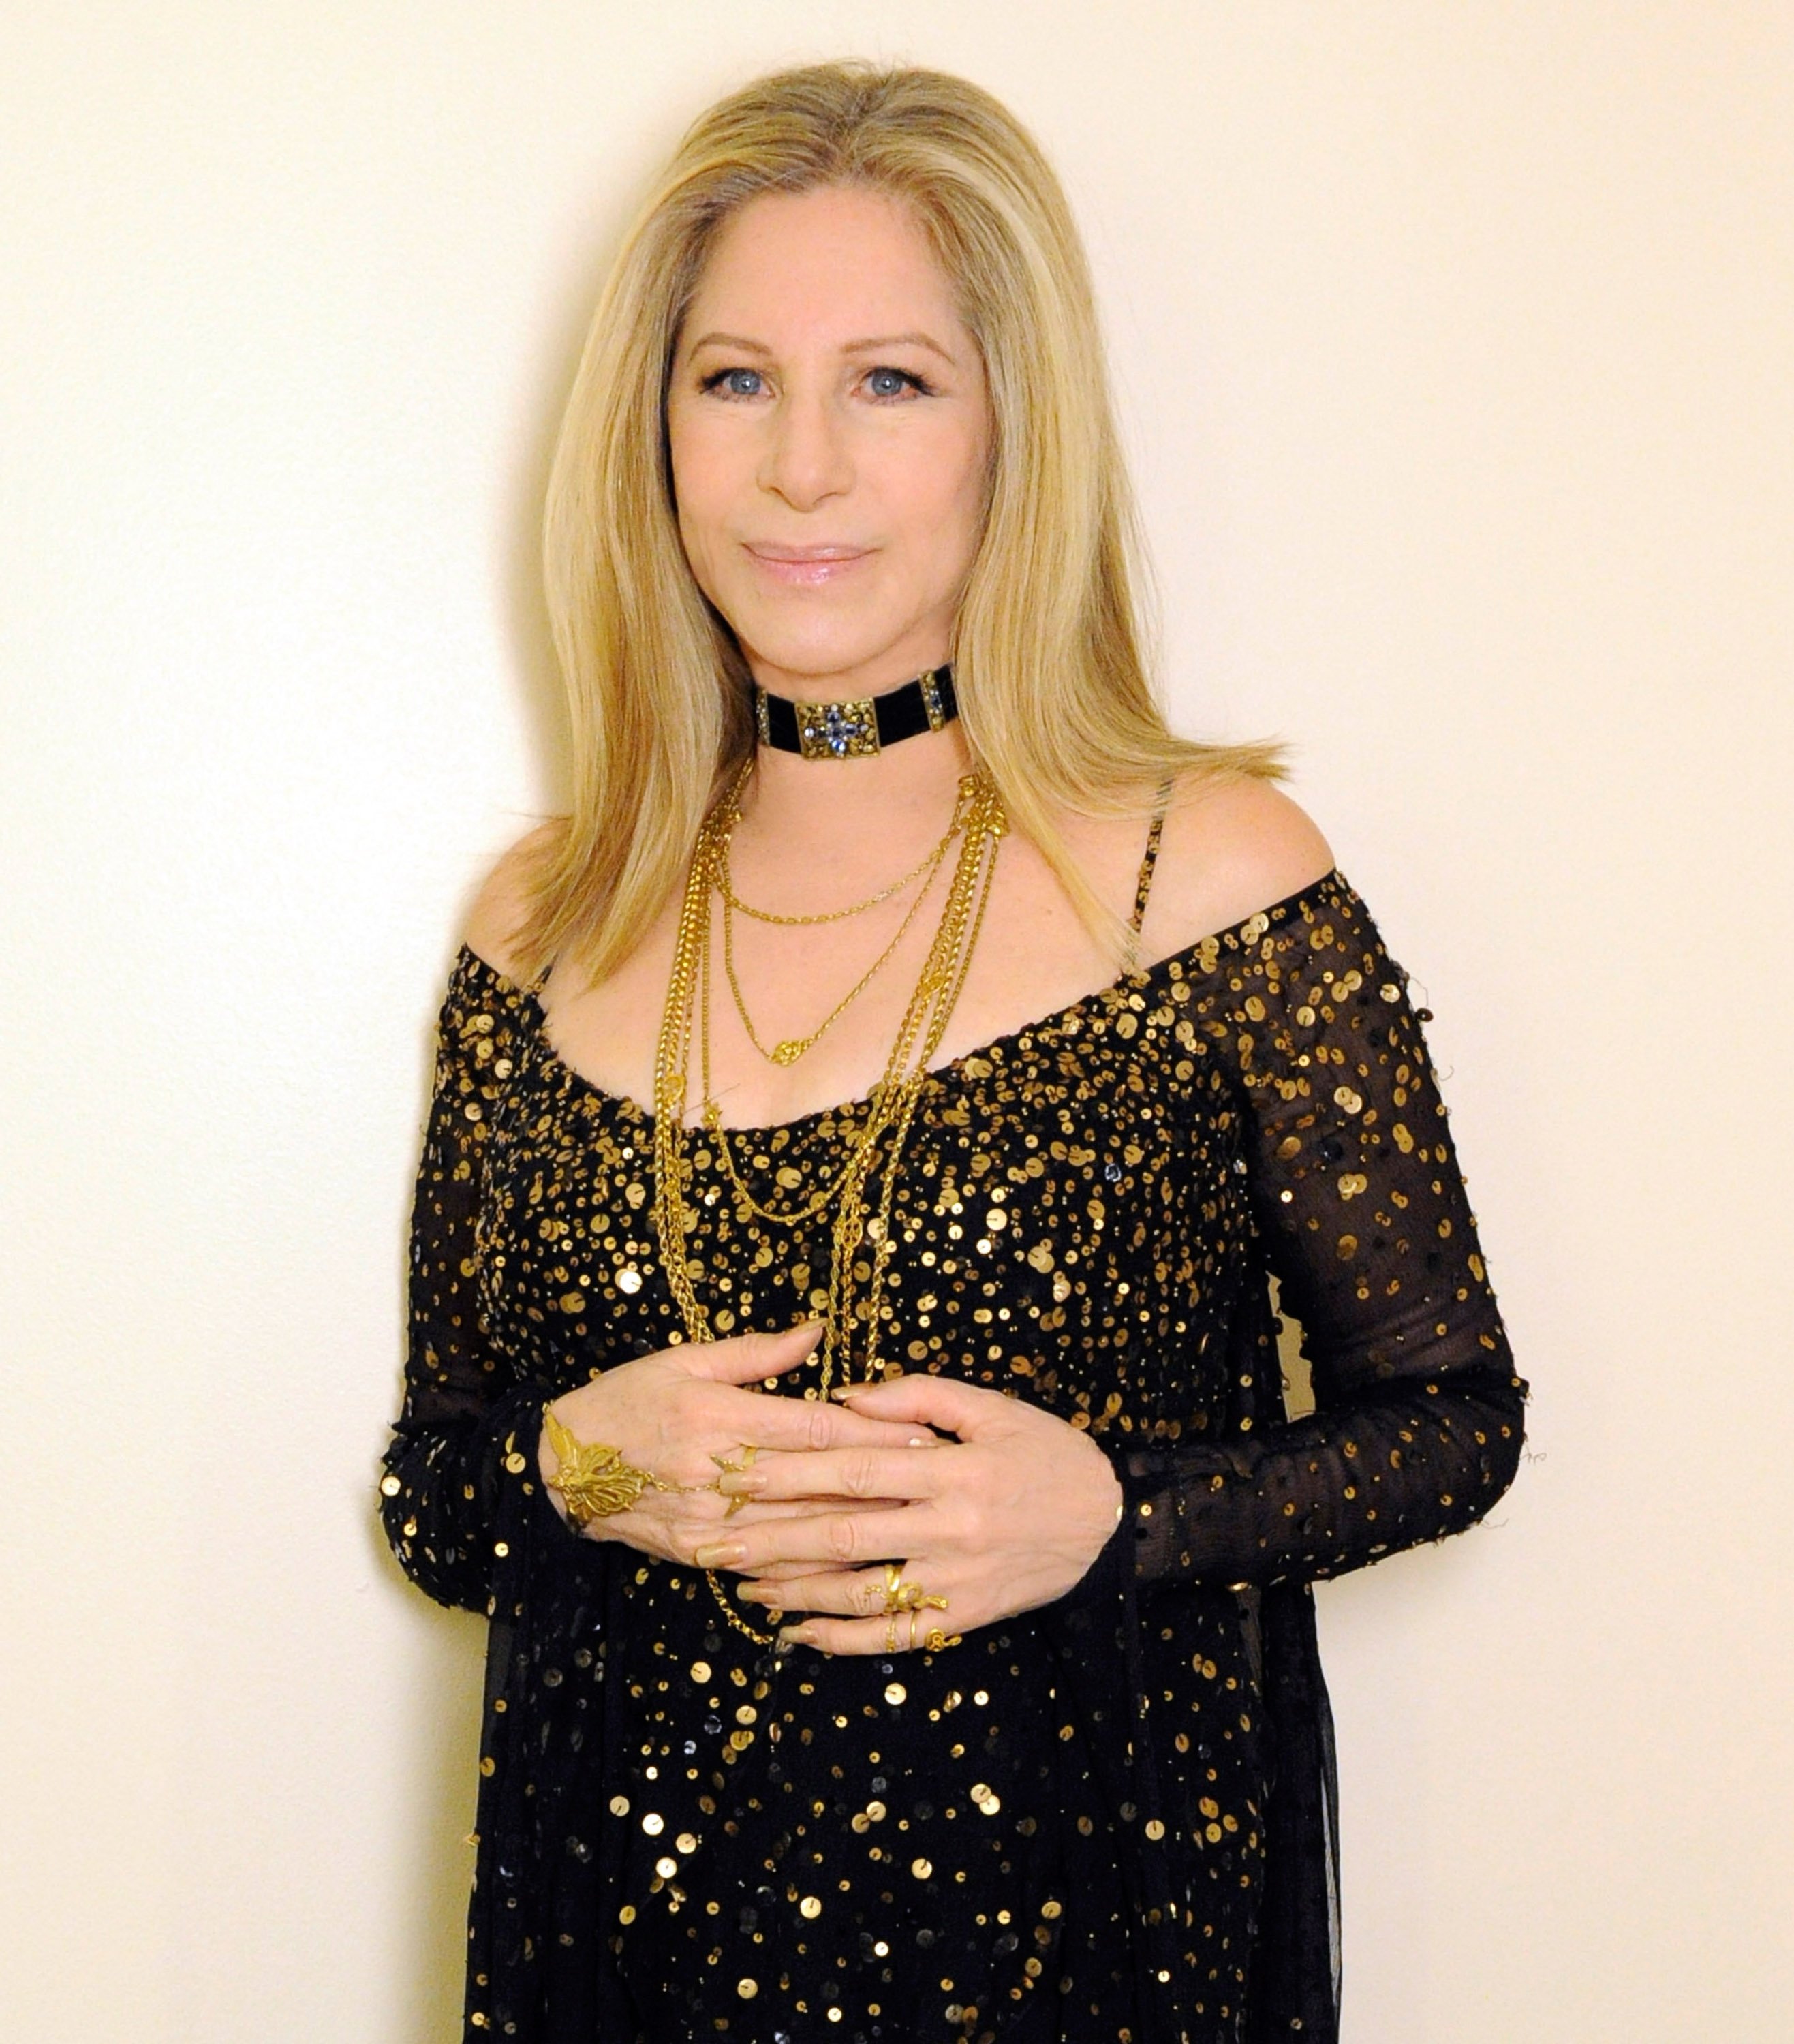 Barbra Streisand poses backstage at the 85th Annual Academy Awards at the Dolby Theatre on February 24, 2013 | Photo: GettyImages